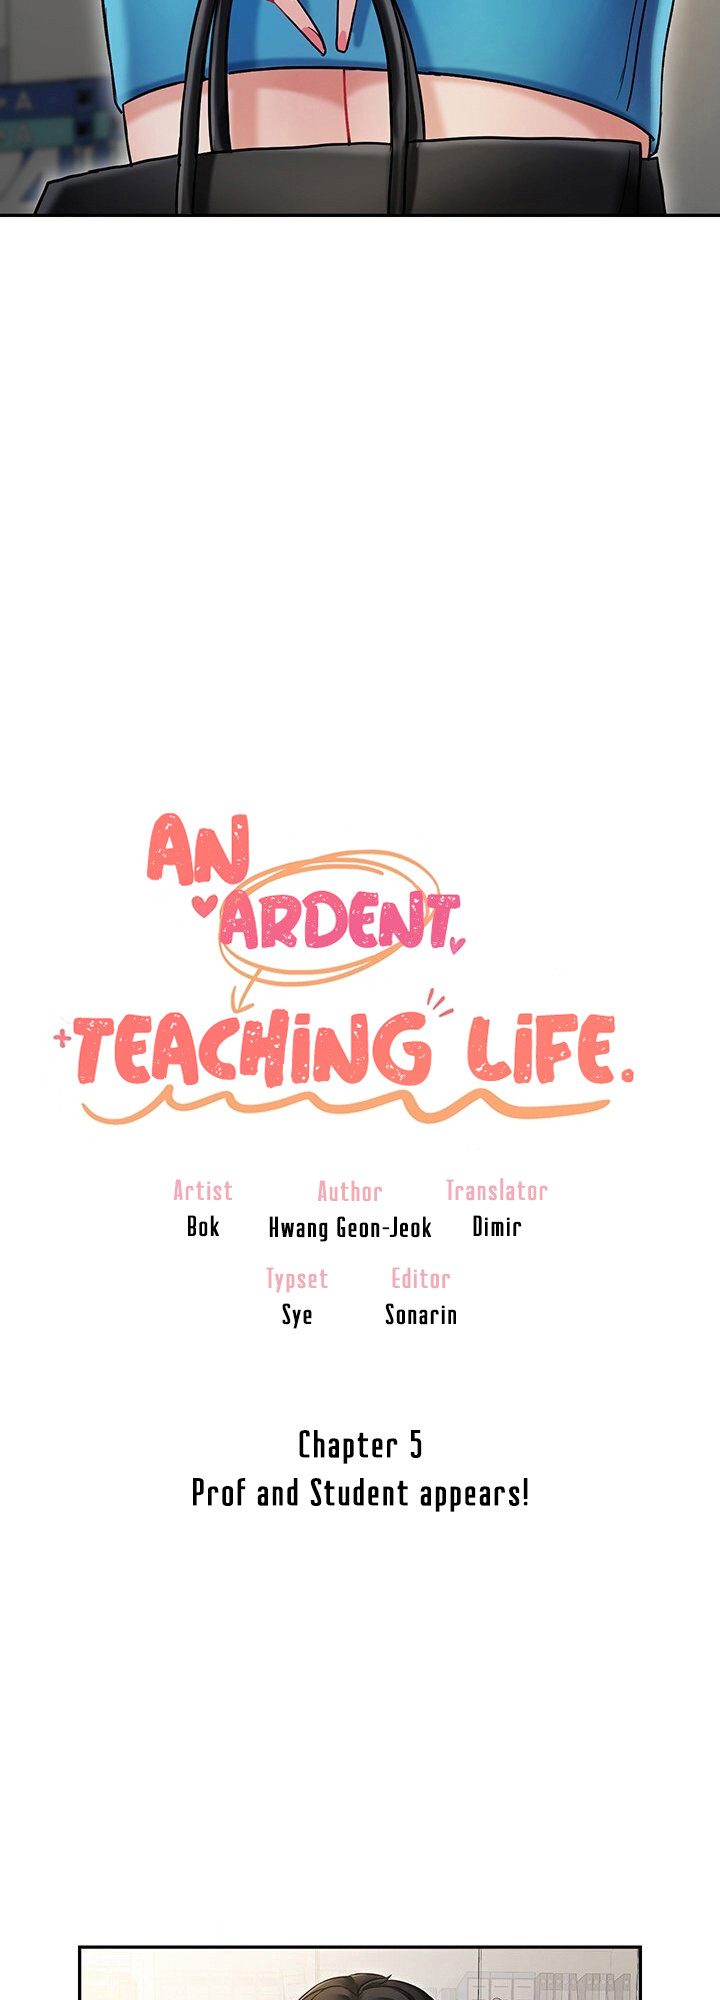 An Ardent Teaching Life image